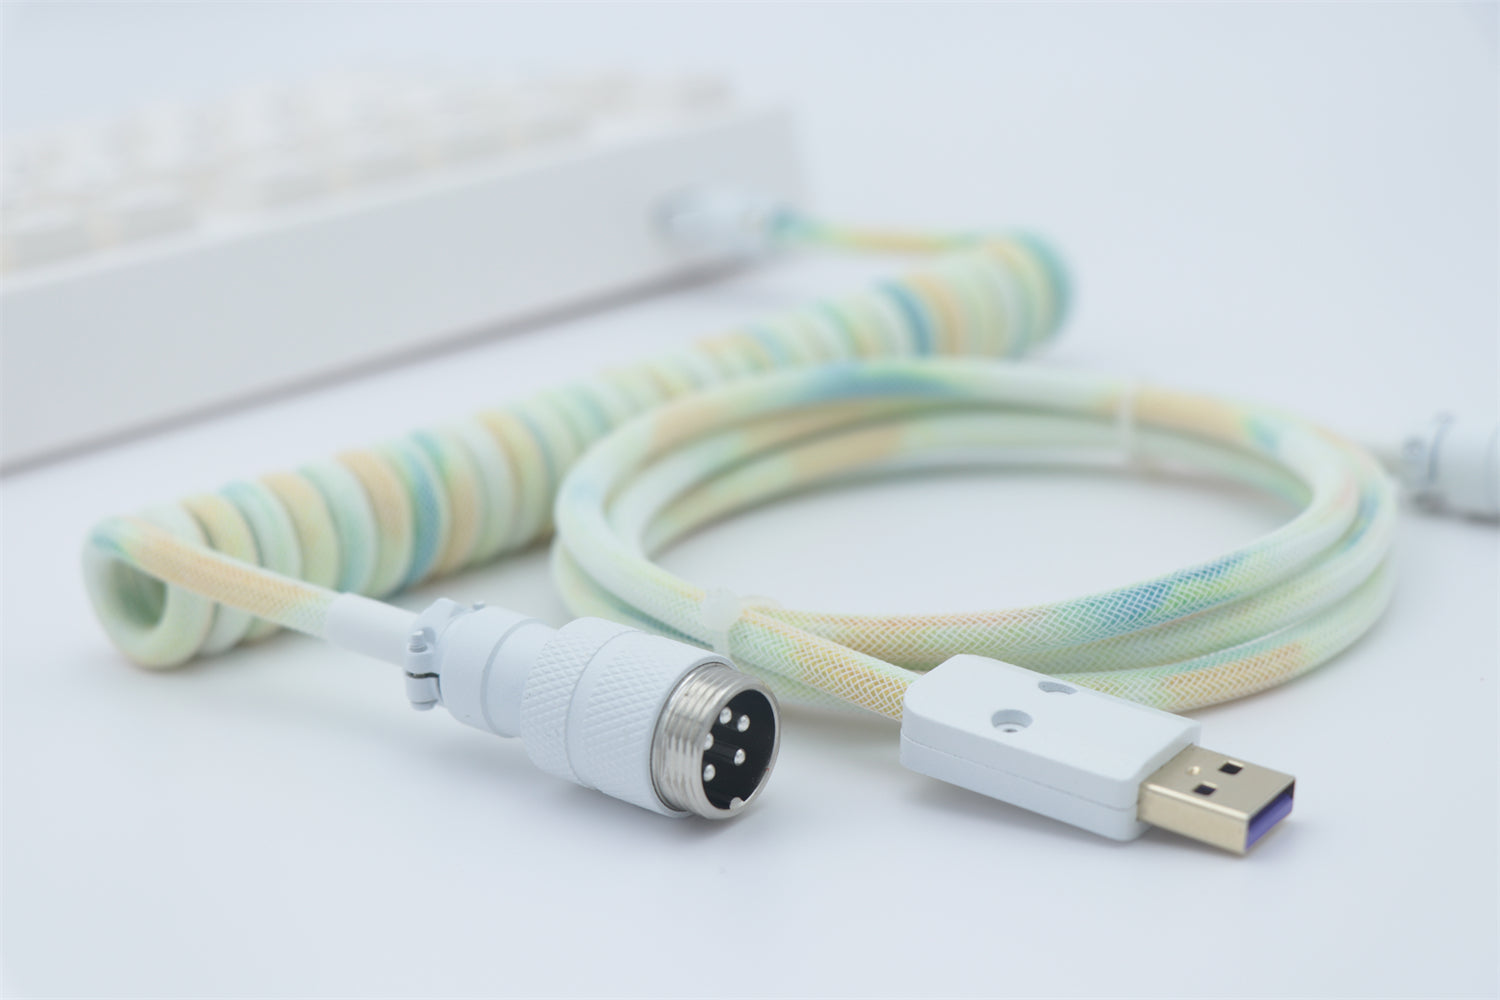 MaxMount Colorful Gradient Coiled Cable USB-C - Rainbow - us